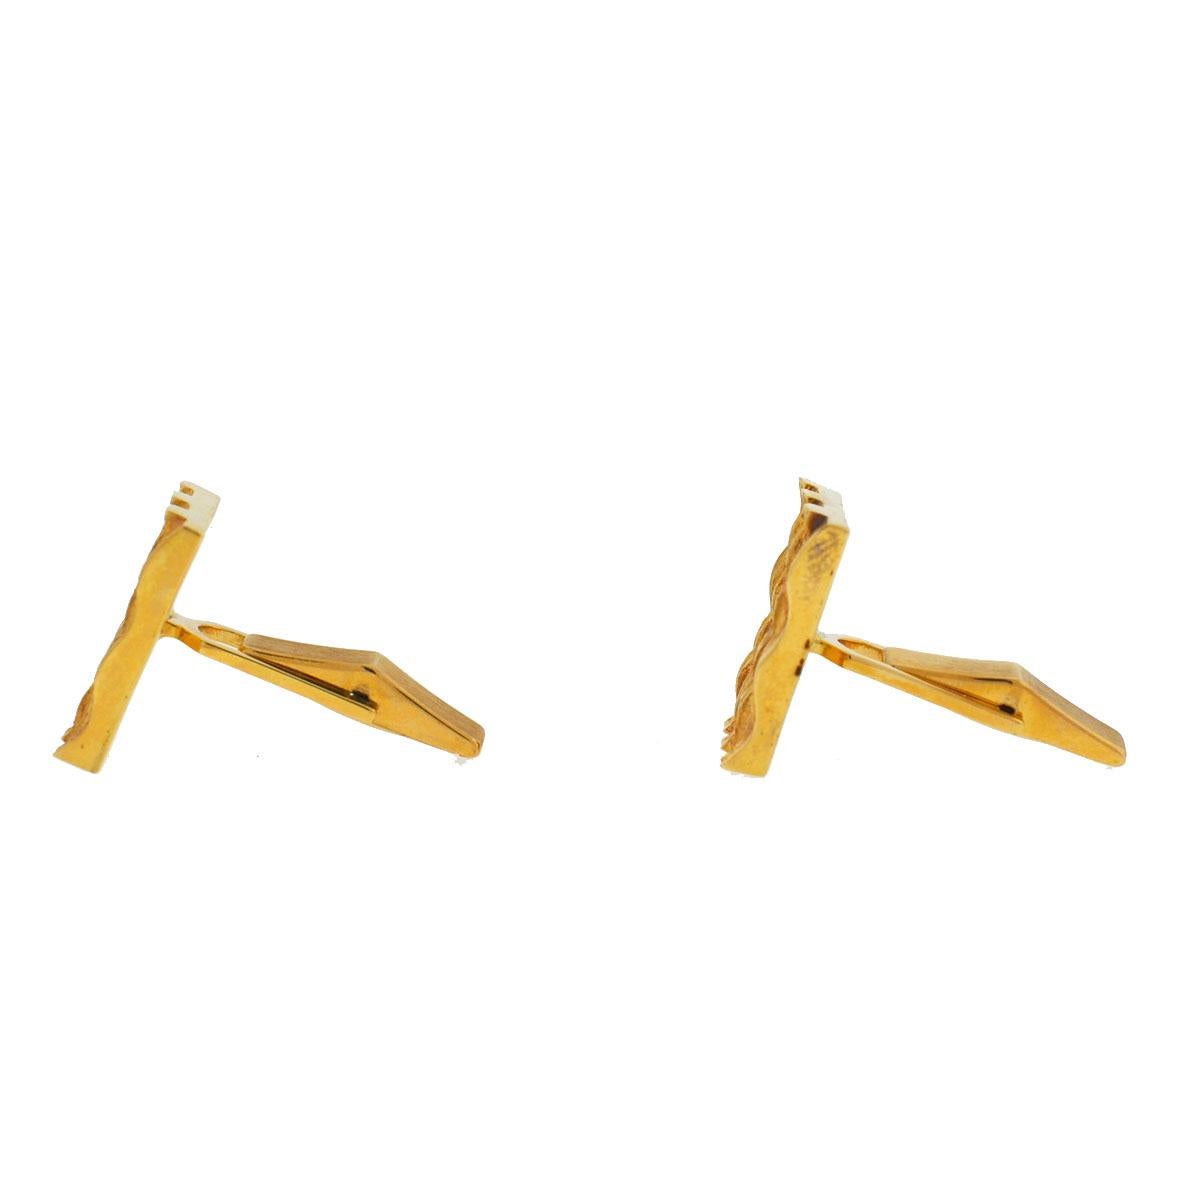 Style-Gold Square Ridged Cufflinks
Metal-14k Yellow Gold
Stones-N/A
Size-20 mm x 15 mm
Weight-14.57 Grams
Includes-Cufflinks ONLY 
SKU-6692-1TIE